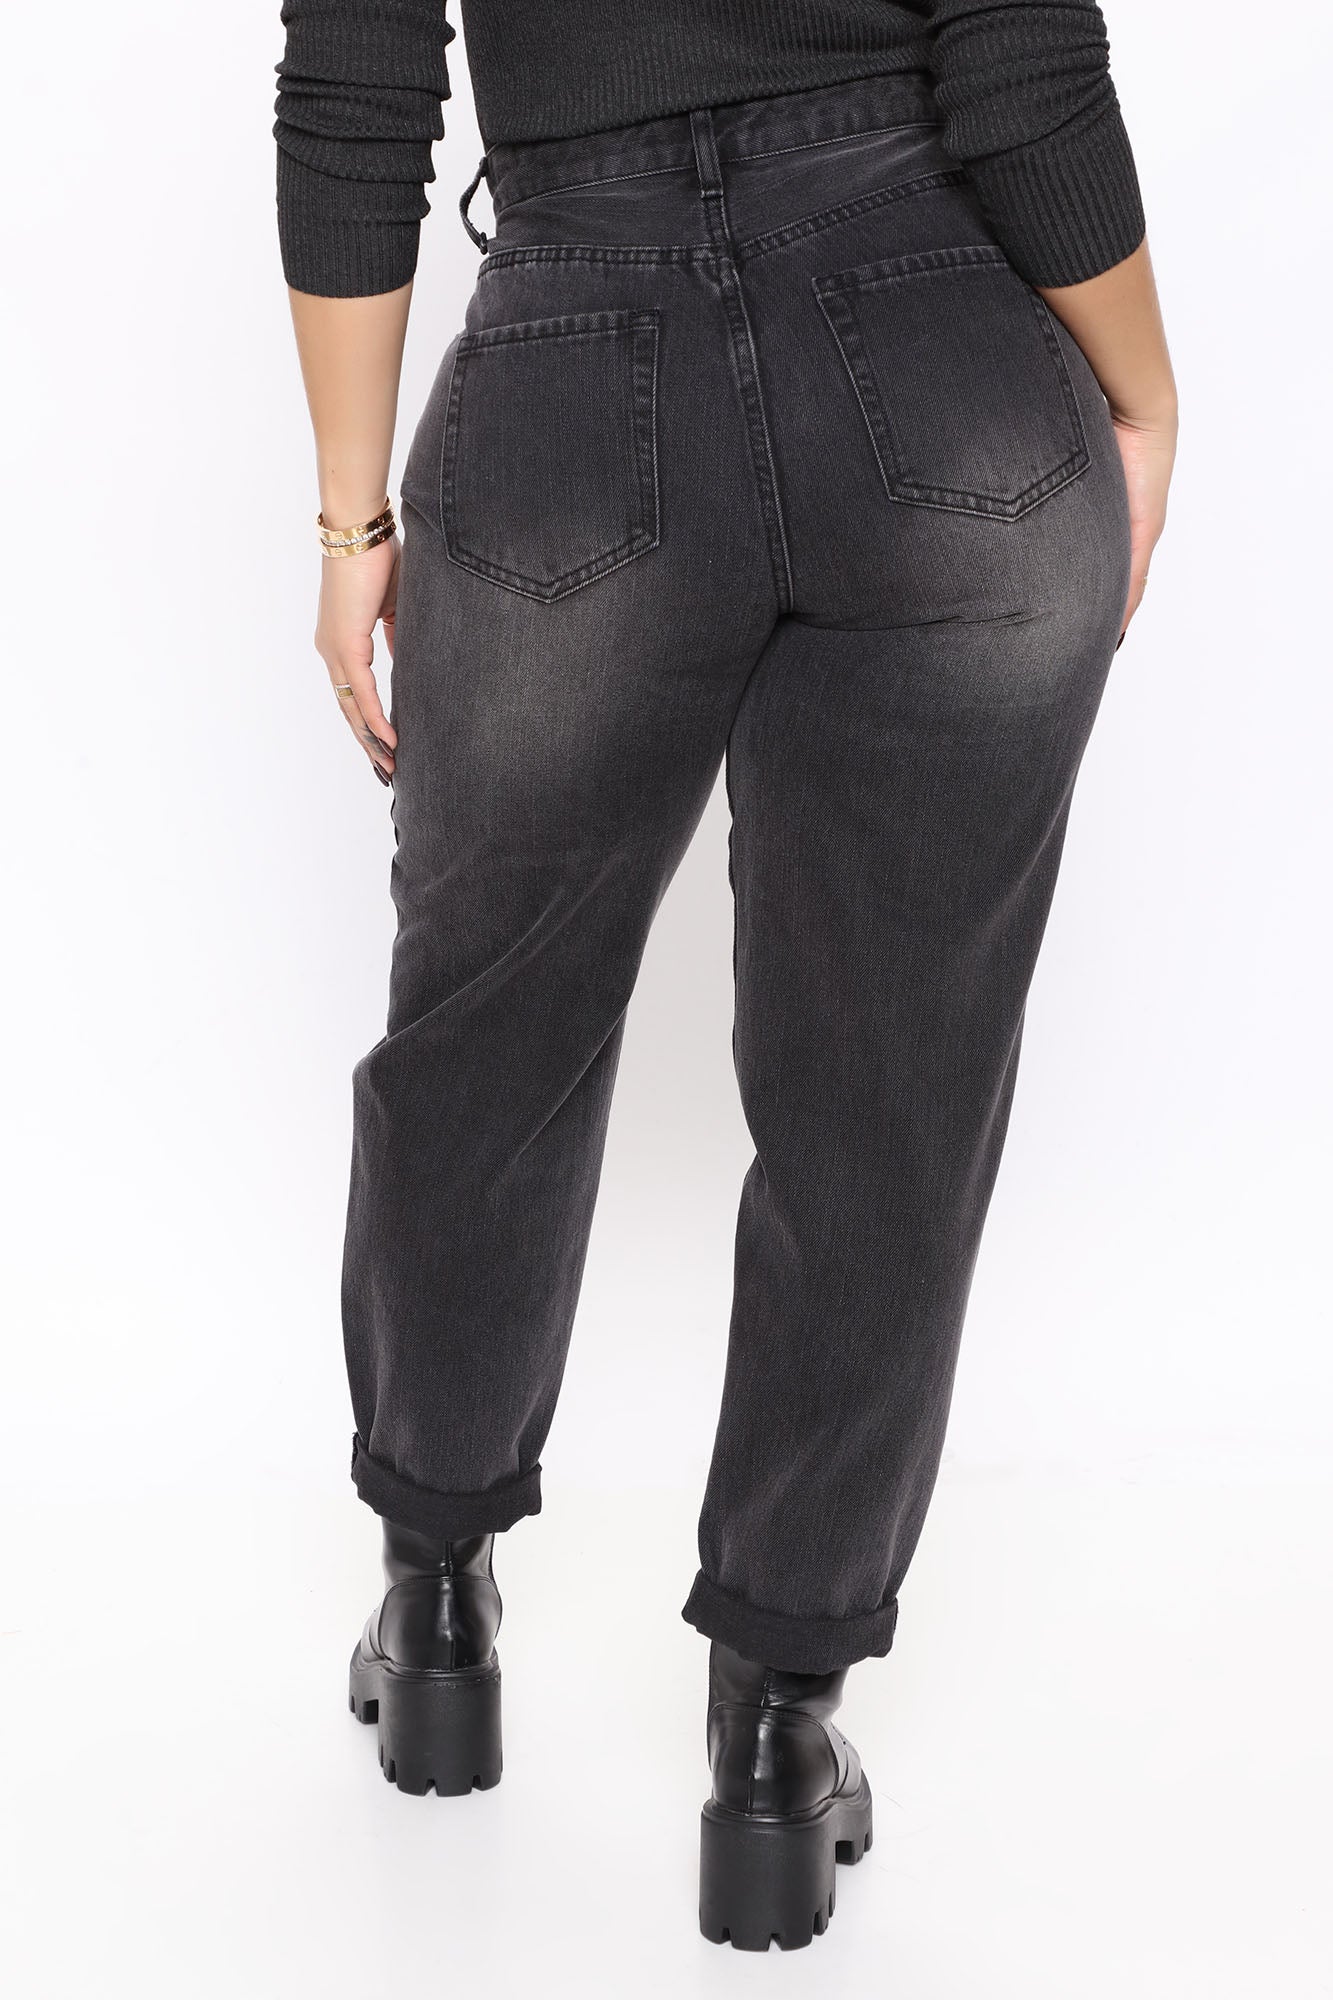 Up Up And Away Balloon Mom Jeans - Black